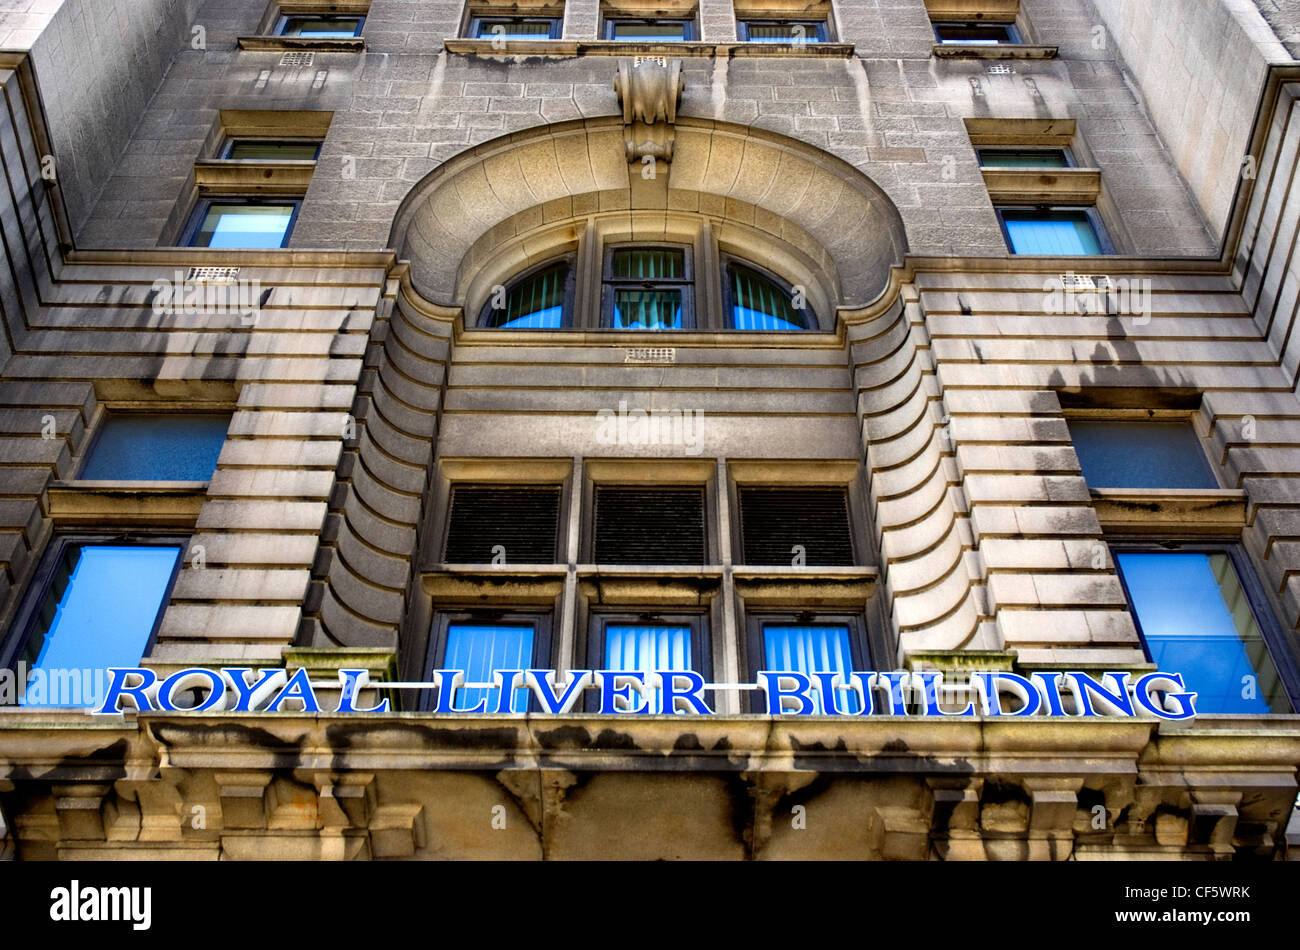 Sign over an entrance to the Royal Liver Building, one of Liverpool's Three Graces. Stock Photo